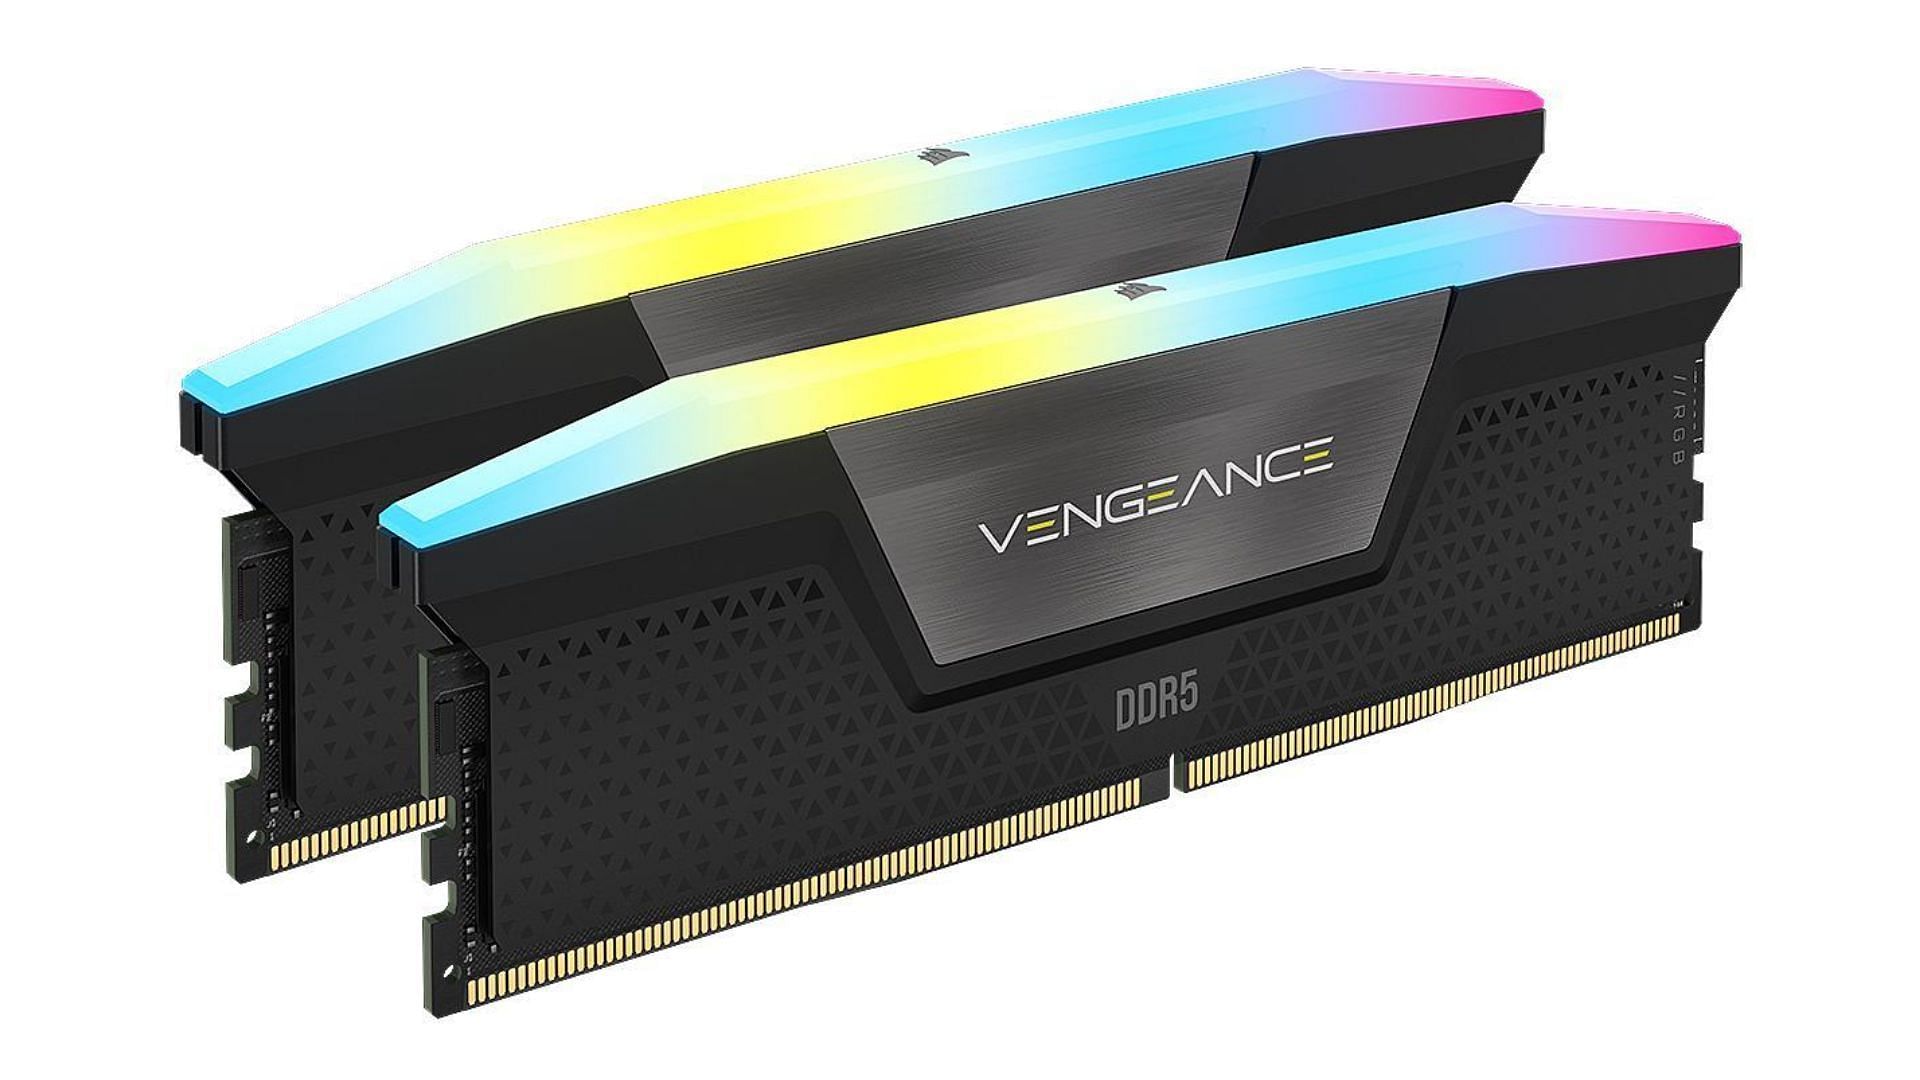 The Corsair Vengeance RGB sticks are some of the best options on a budget (Image via Corsair)